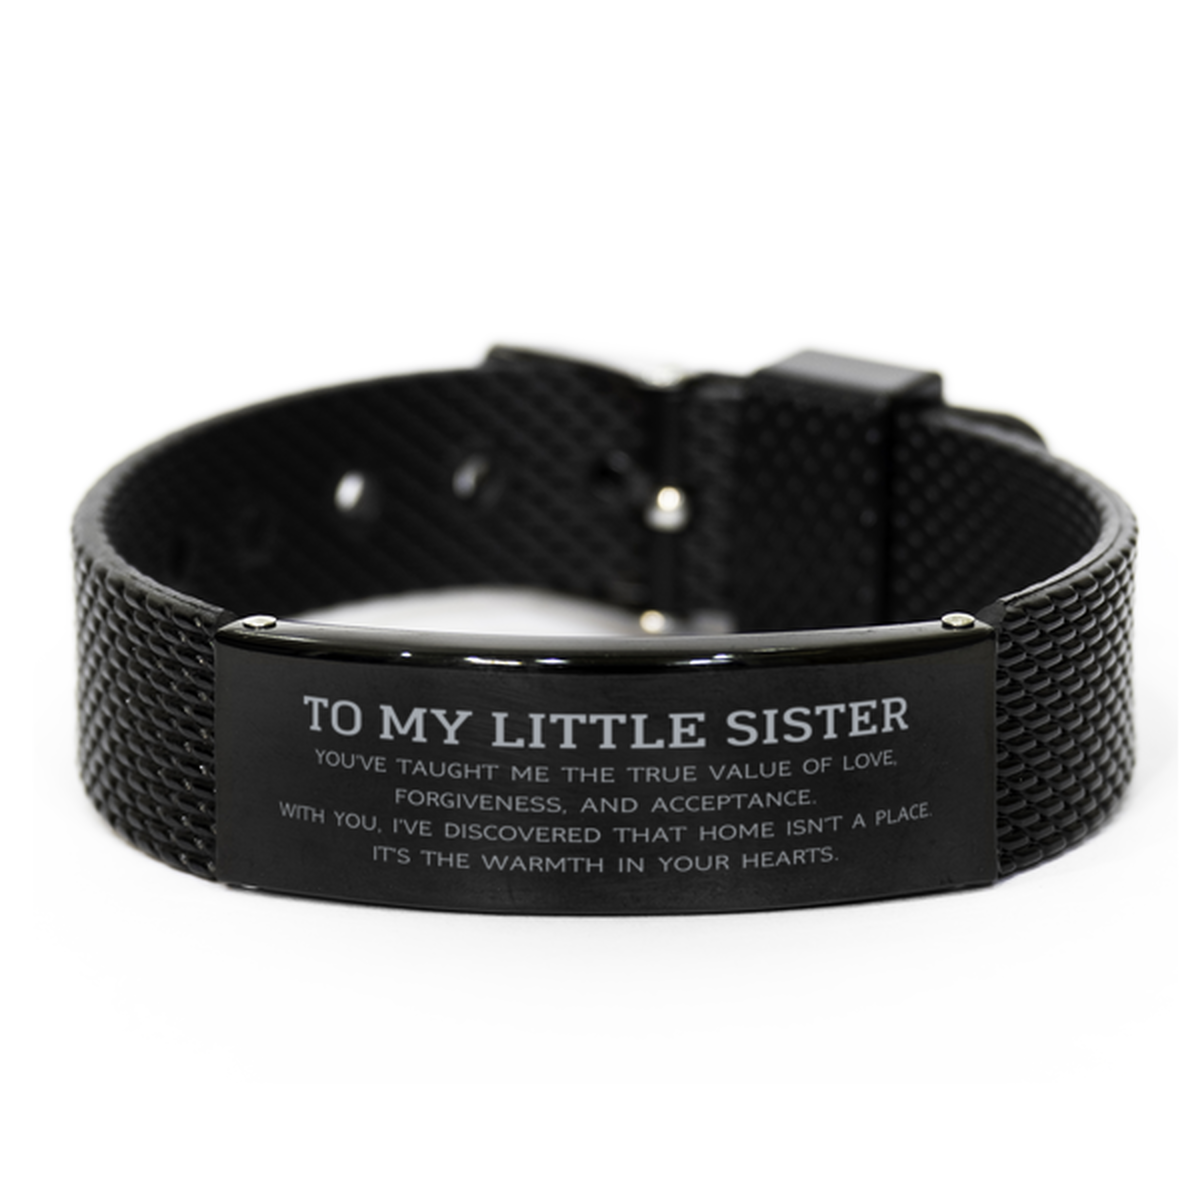 To My Little Sister Gifts, You've taught me the true value of love, Thank You Gifts For Little Sister, Birthday Black Shark Mesh Bracelet For Little Sister